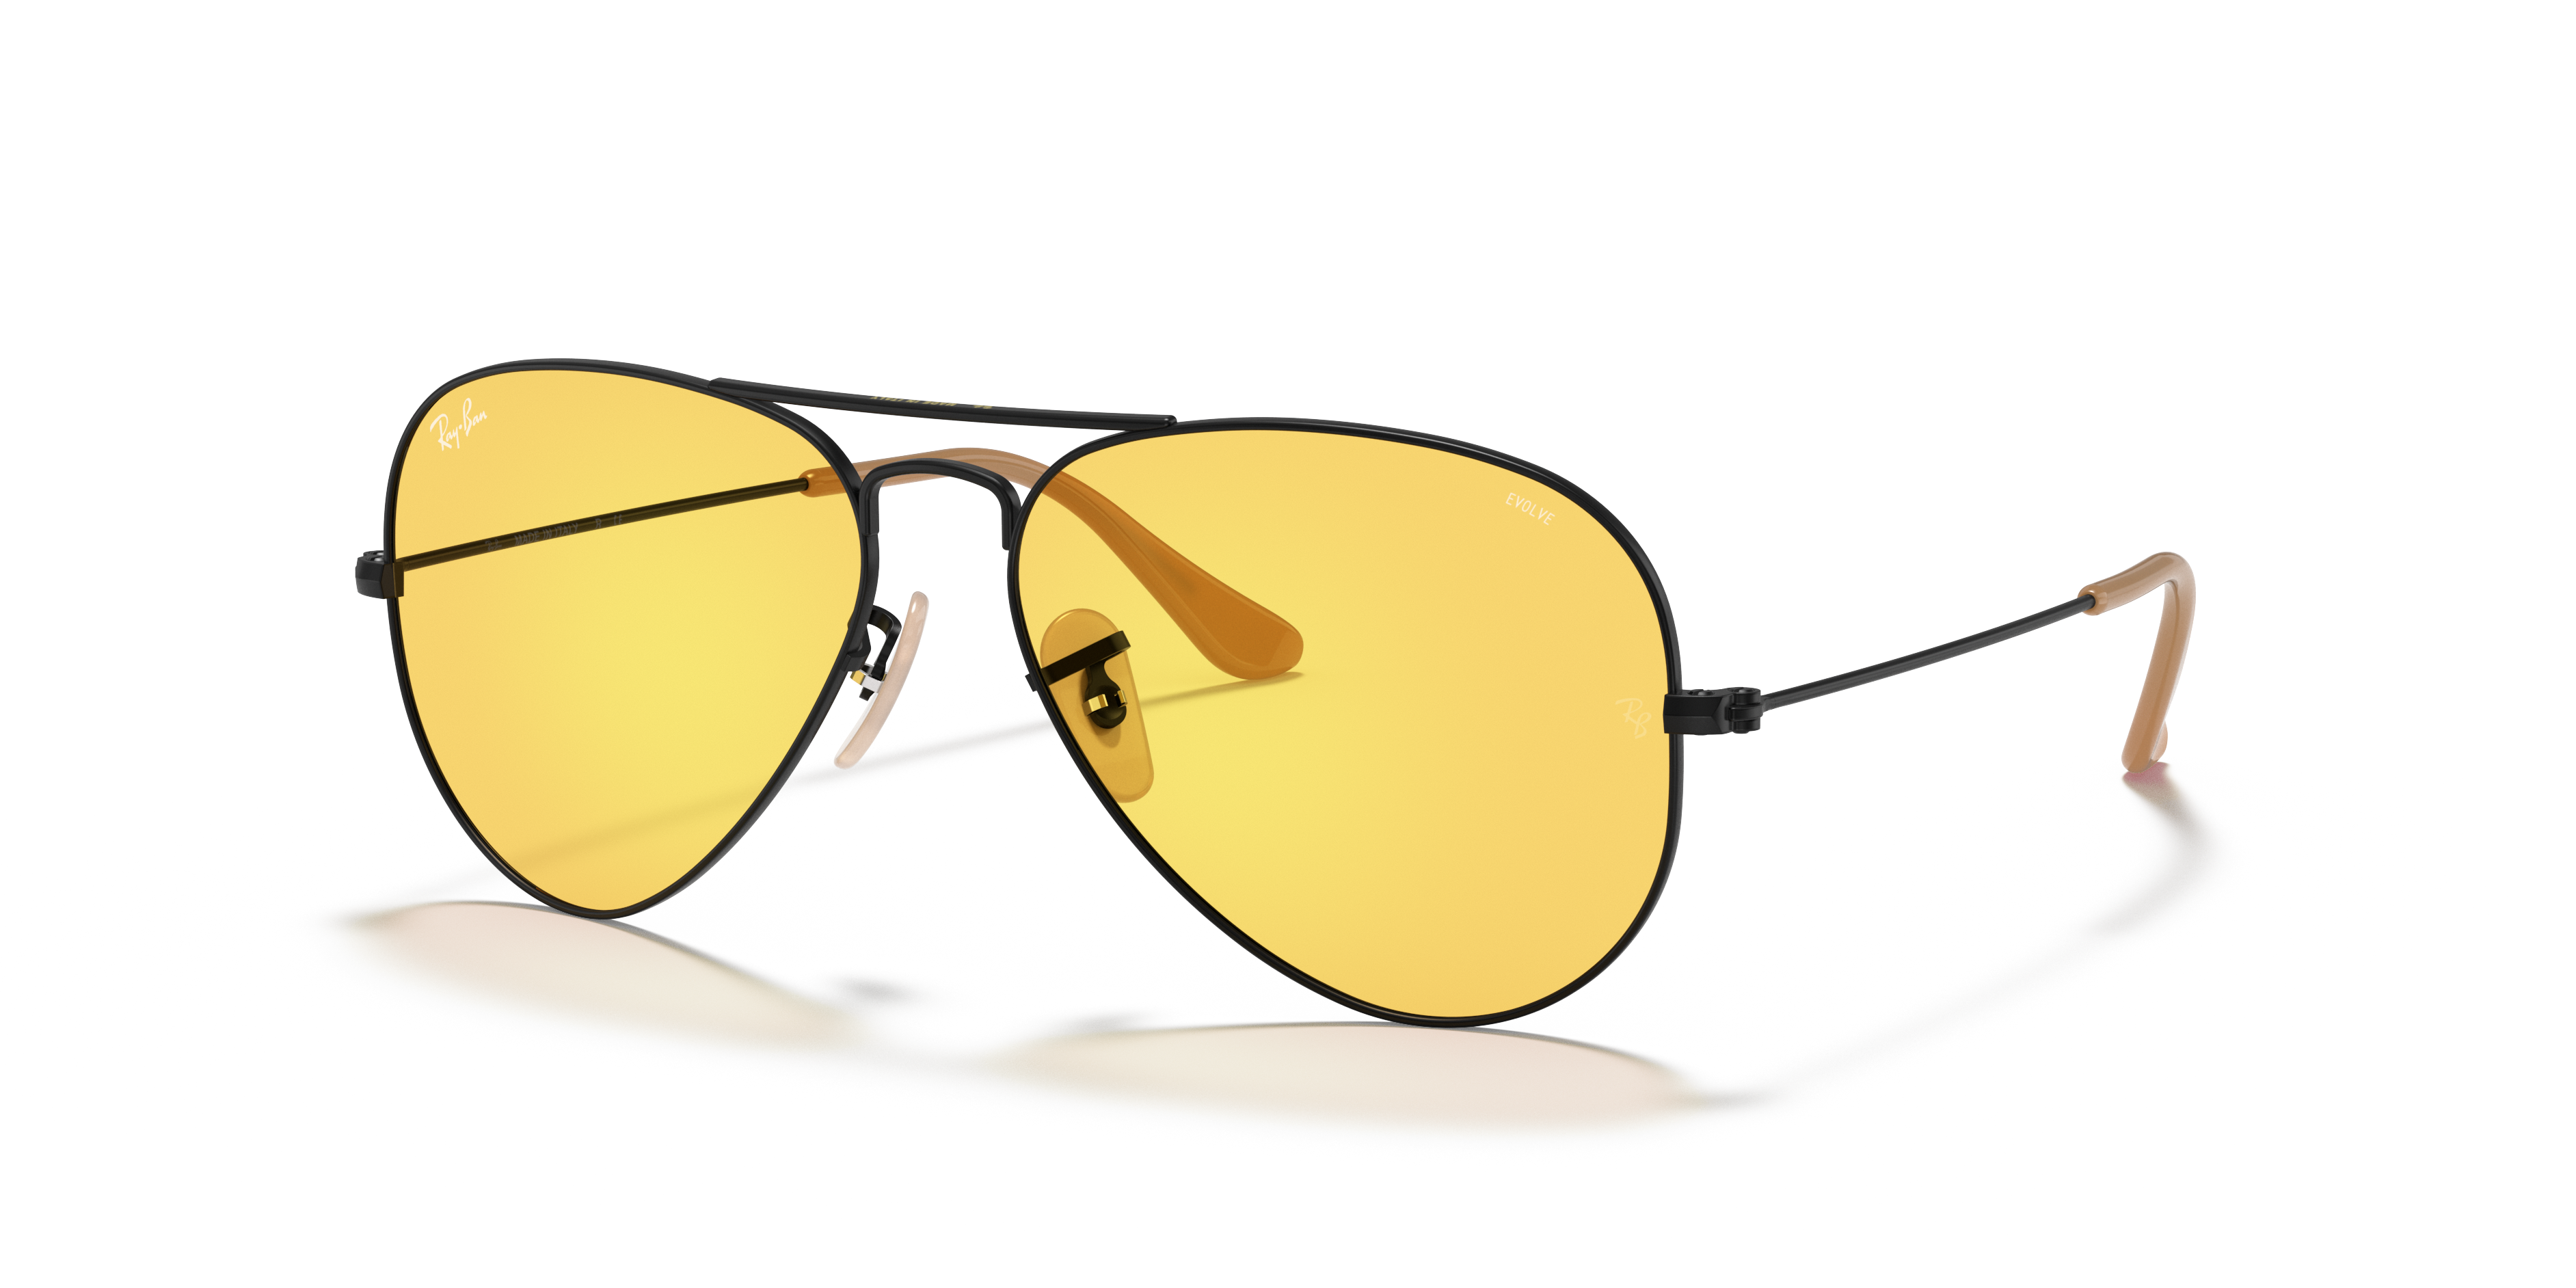 AVIATOR WASHED EVOLVE Sunglasses in Black and Yellow Photochromic